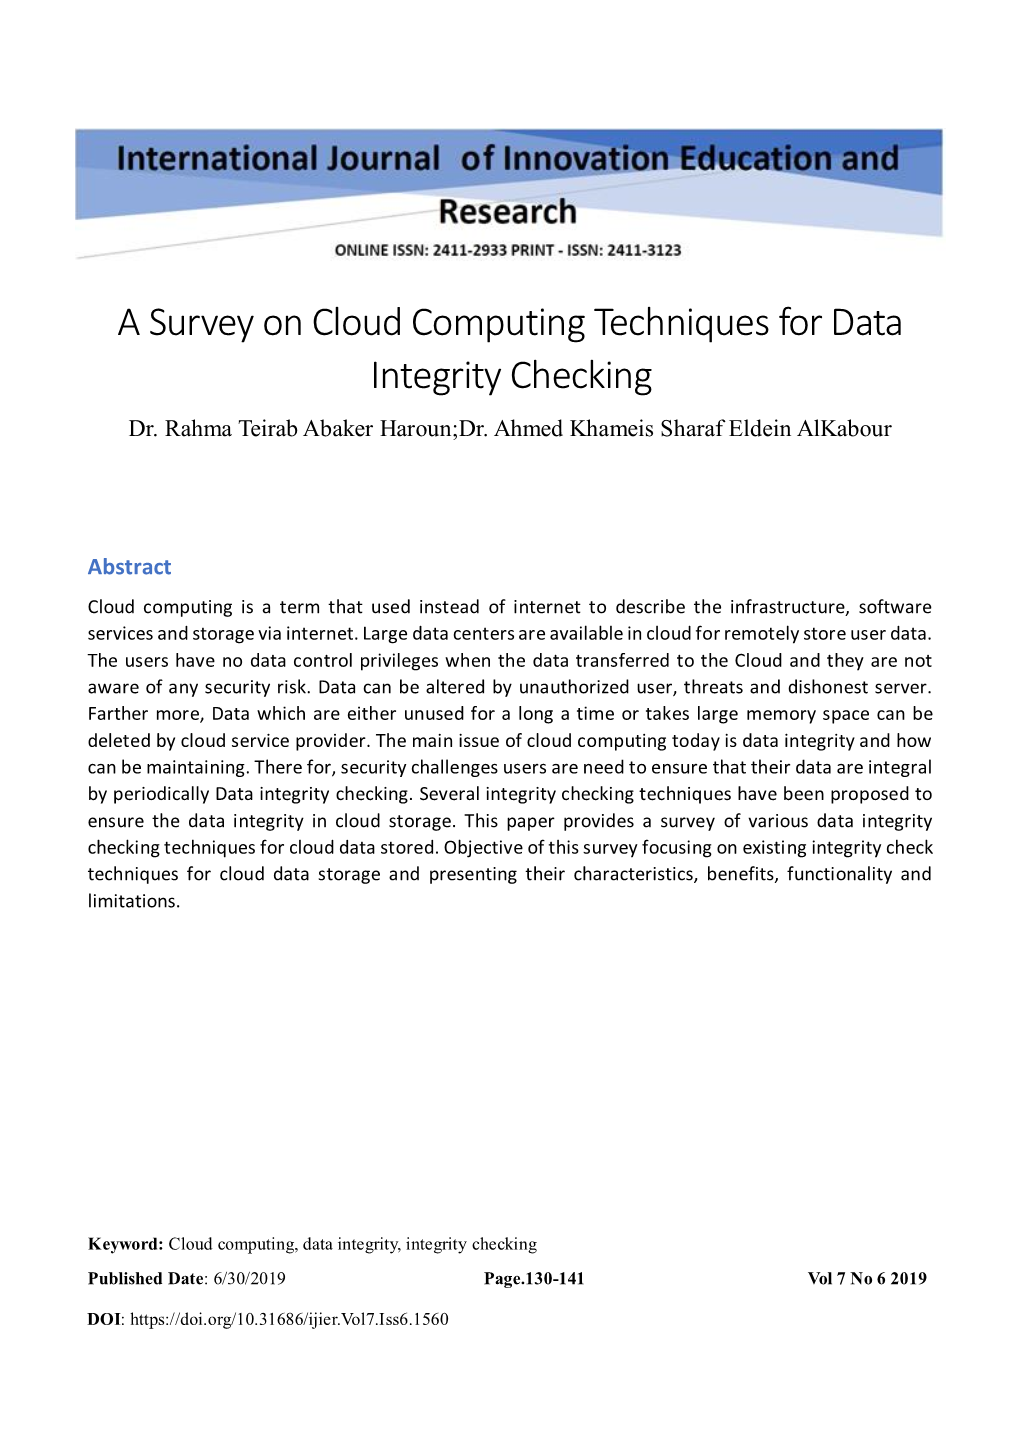 A Survey on Cloud Computing Techniques for Data Integrity Checking